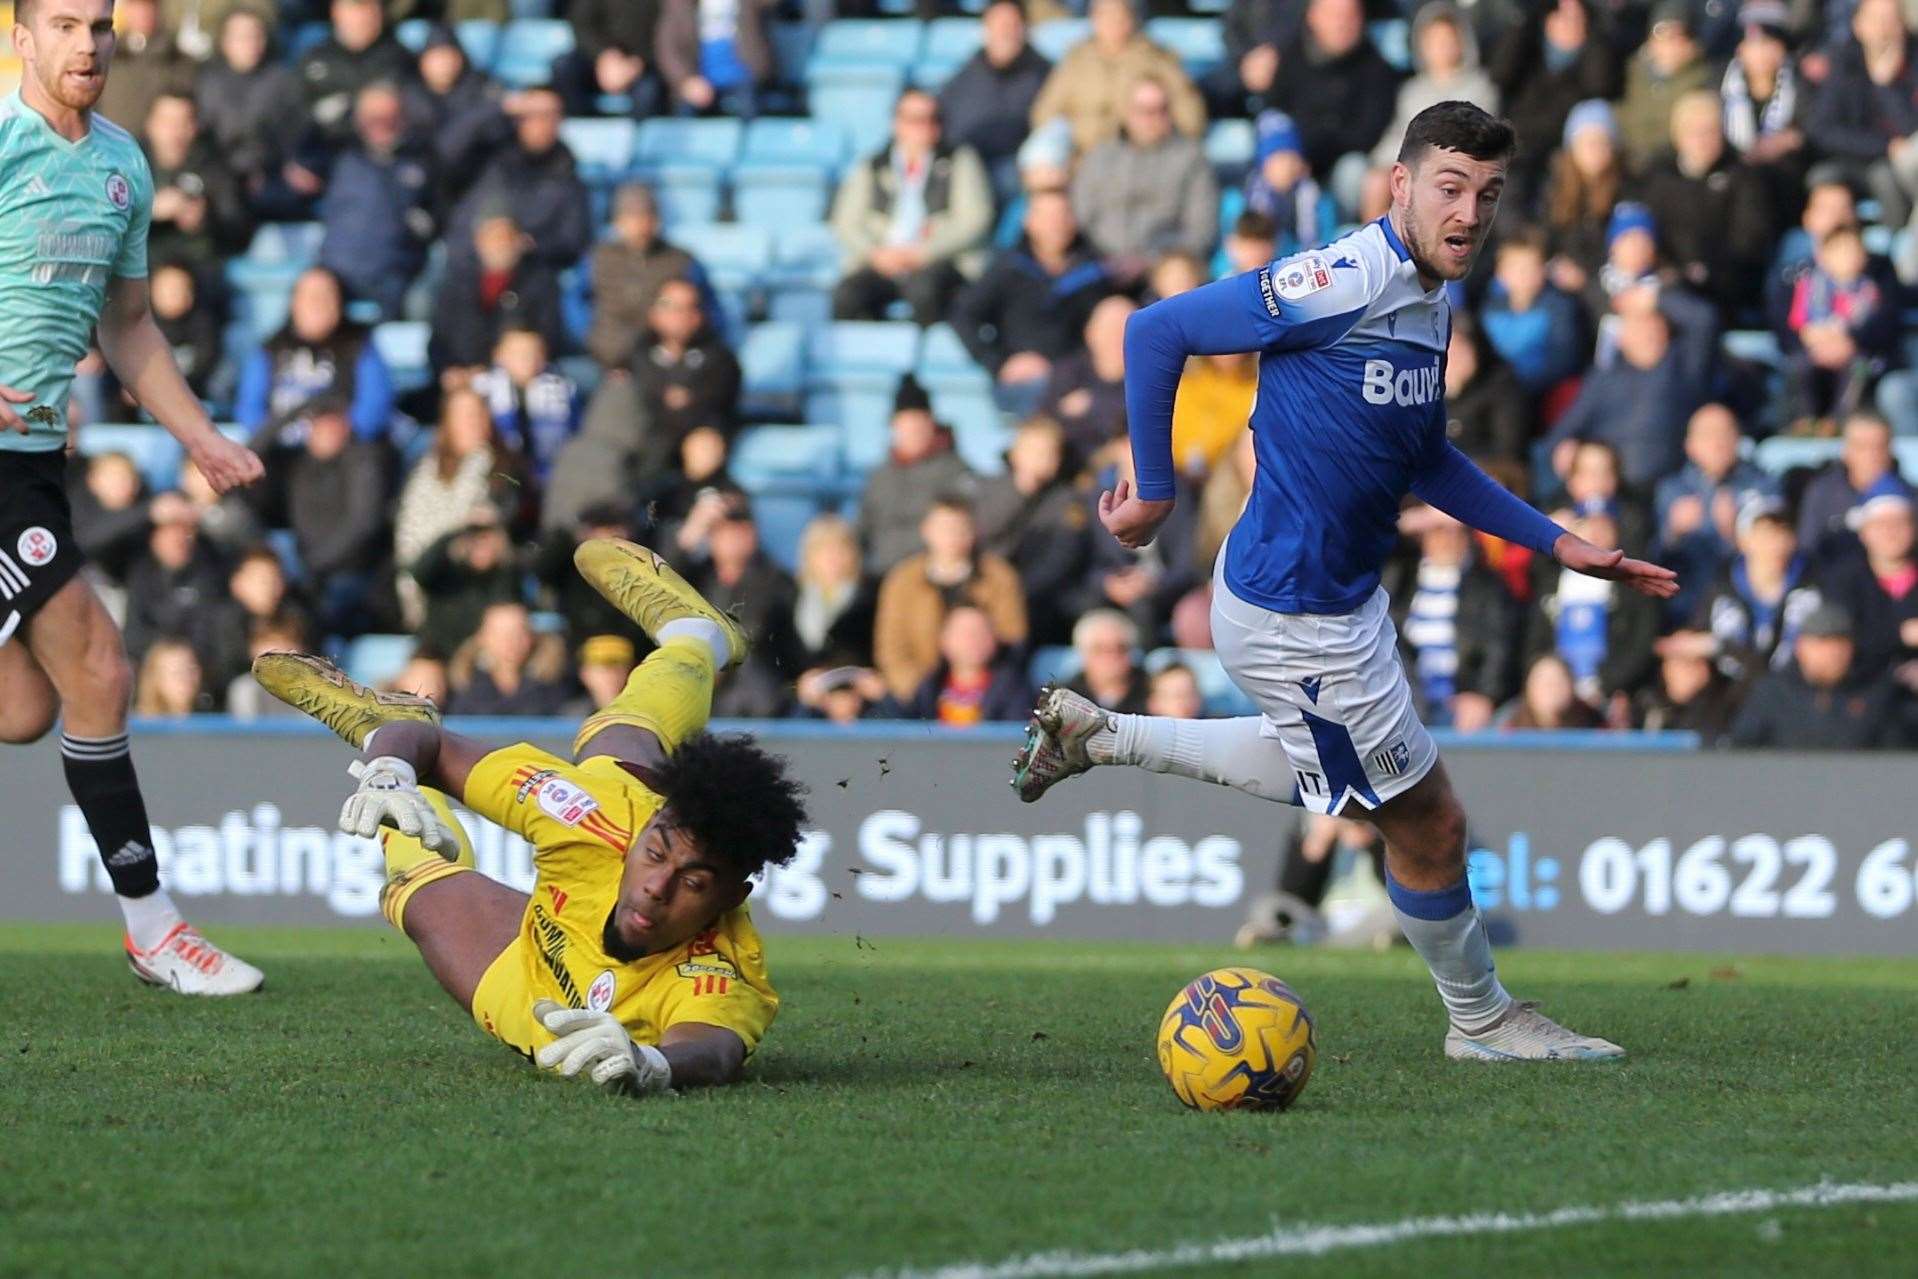 Gillingham's Ashley Nadesan with a chance against Crawley Picture: @Julian_KPI